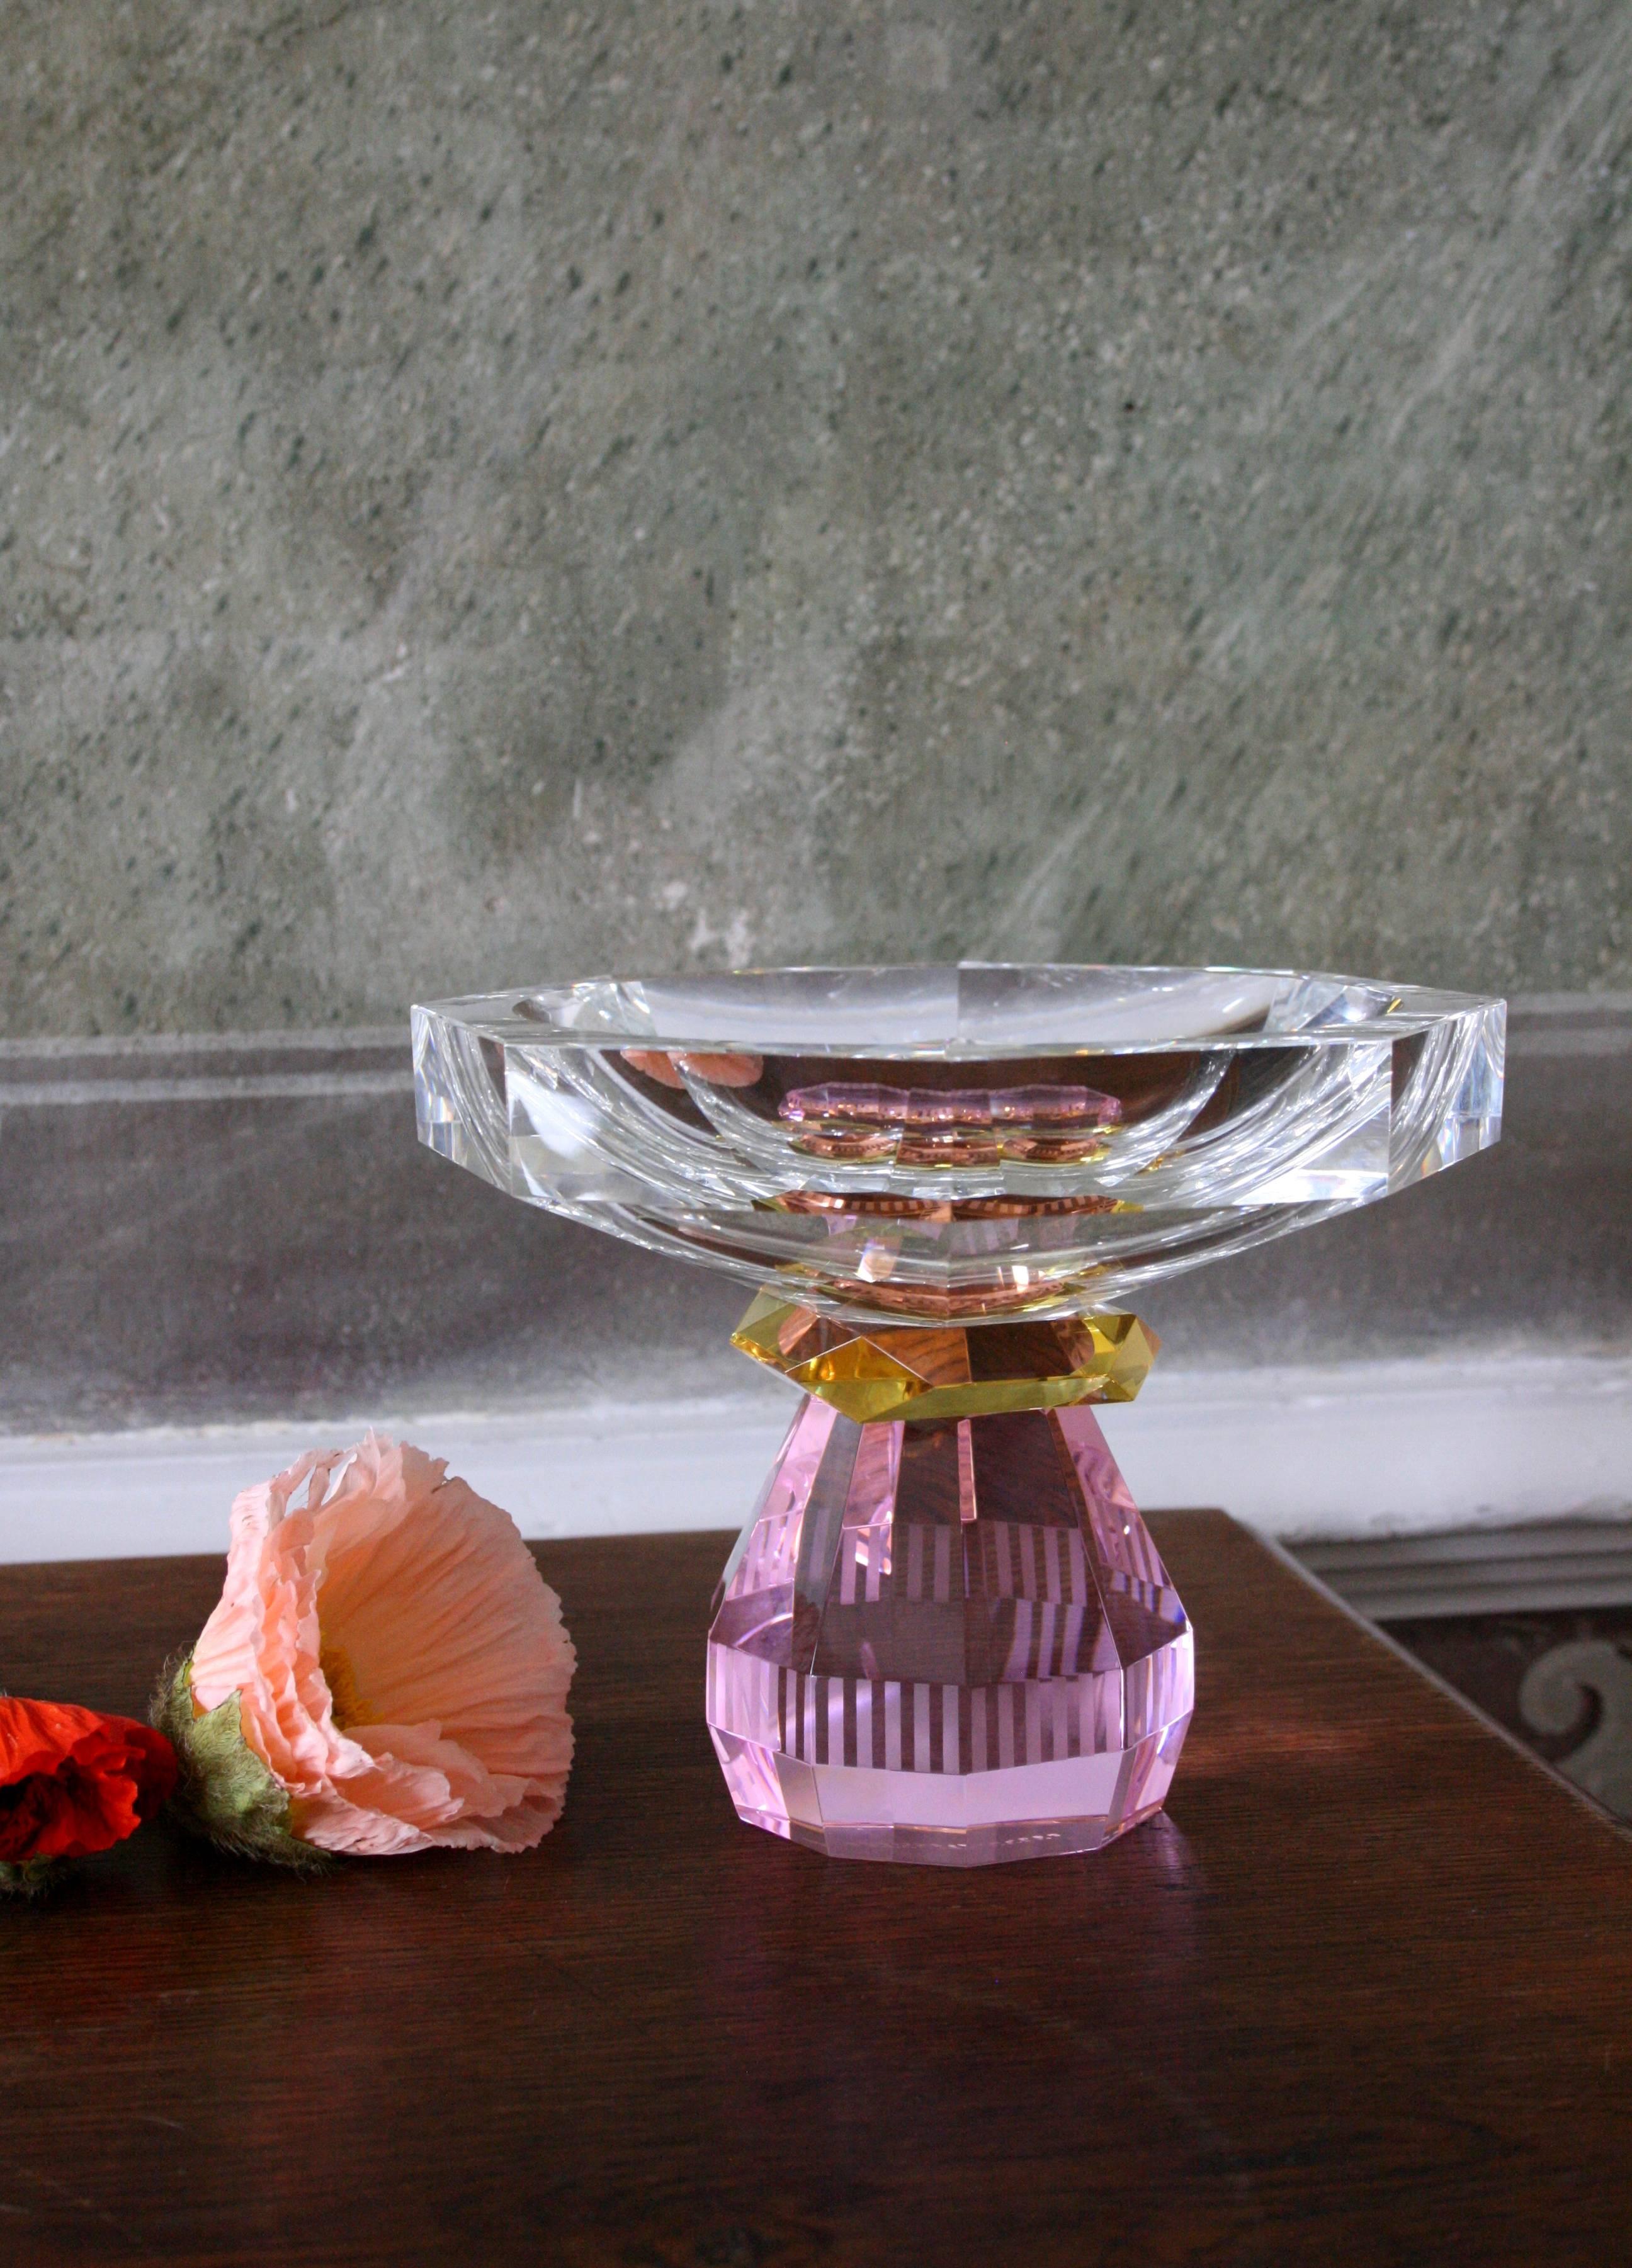 Madison bowl, hand-sculpted contemporary crystal
Decorative bowl
Handsculpted in crystal
Measures: L 18 x H 14 x D 18 cm

Madison Bowl: 
The stunning Madison bowl looks radiant whether filled with rose petals, floating candles or candy. The